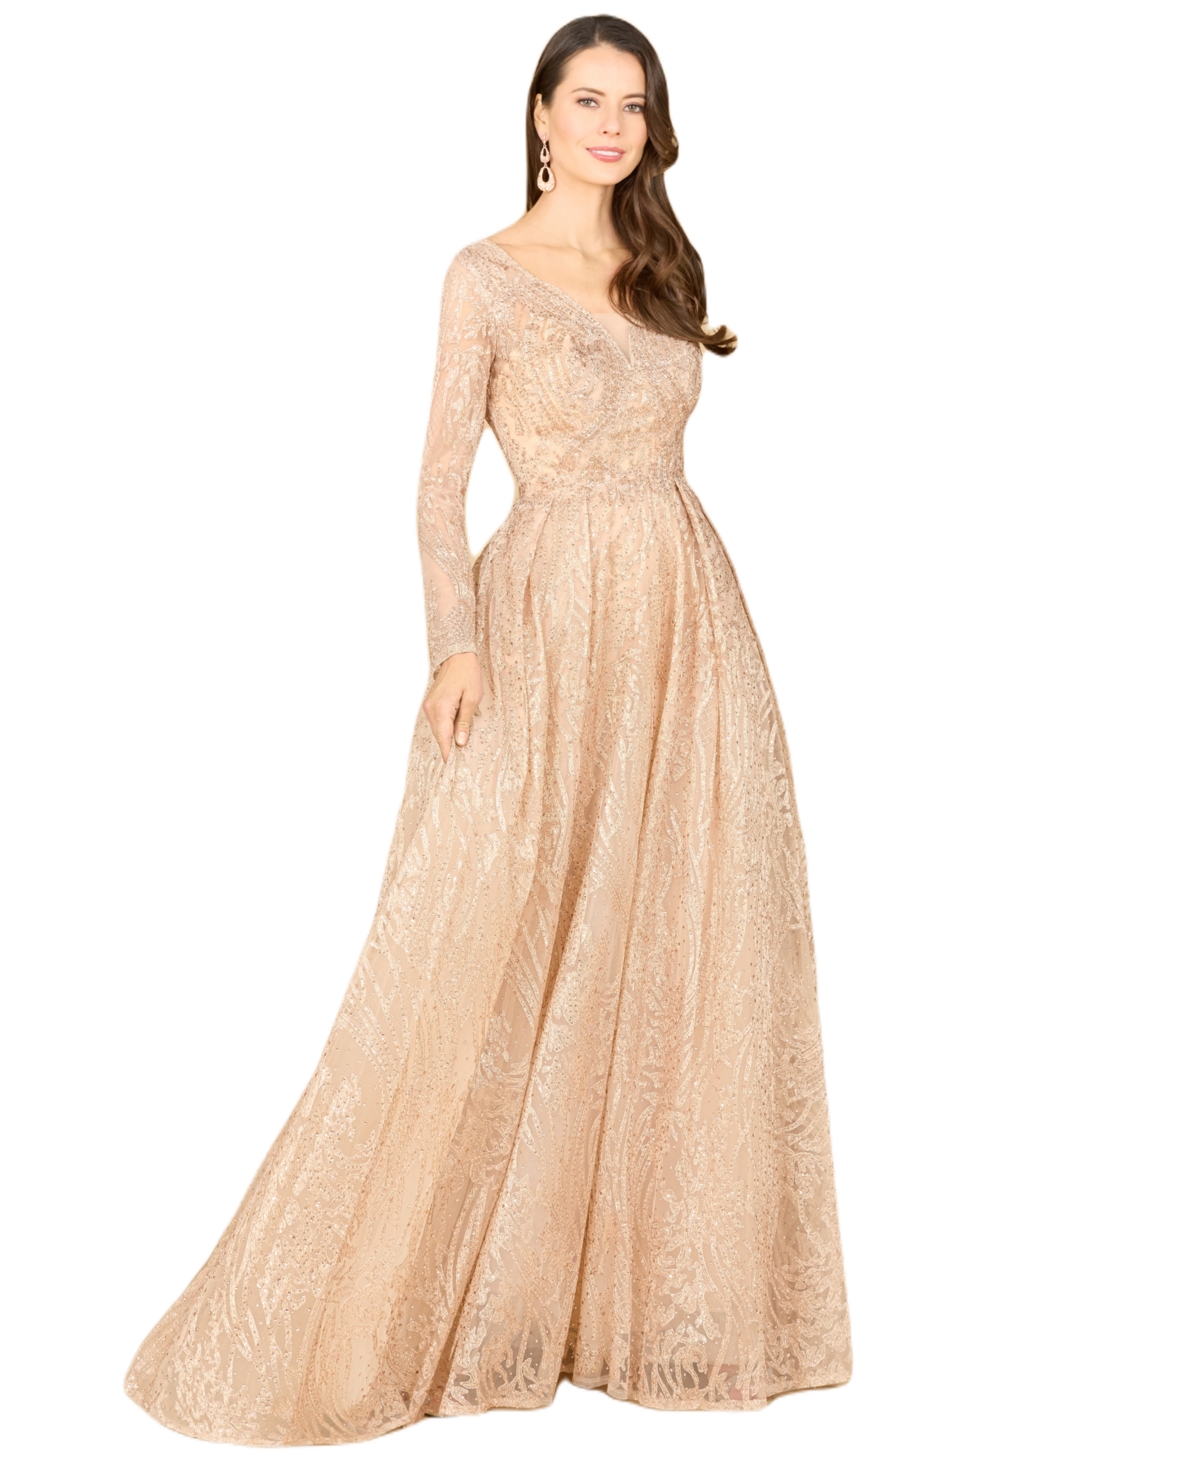 Women's Long Sleeve, A-line Gown with a V-Neckline - Champagne